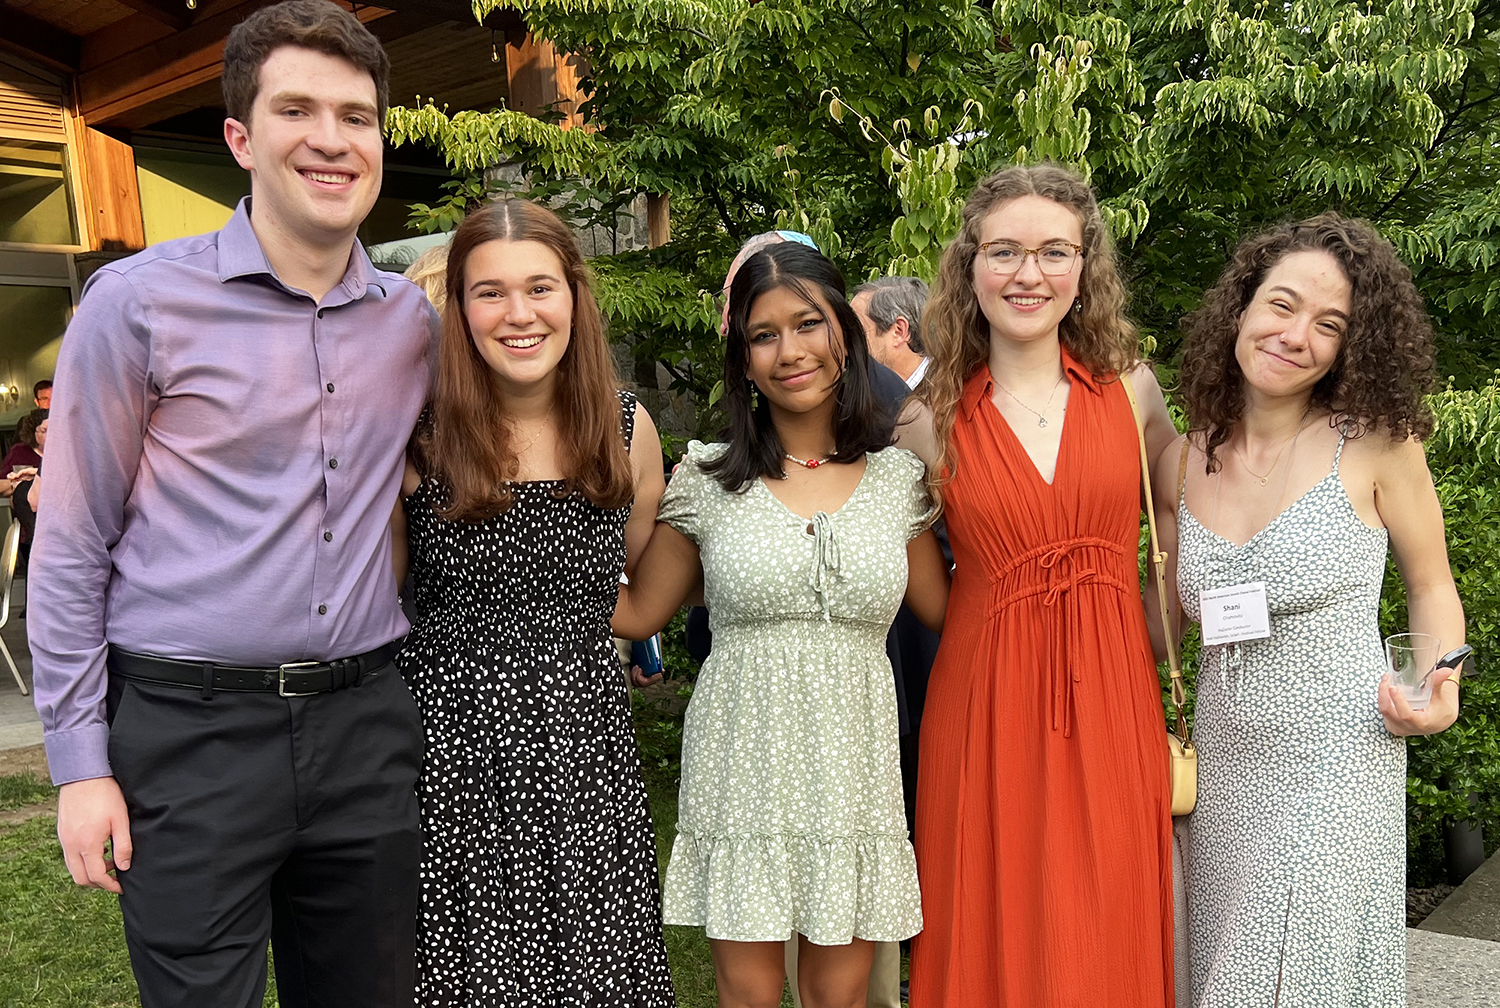 Saydie Grossman, second from the left, and Shani Chamovitz, on the right, pose with friends during an outdoor reception at the festival. RNS photo by Kathryn Post